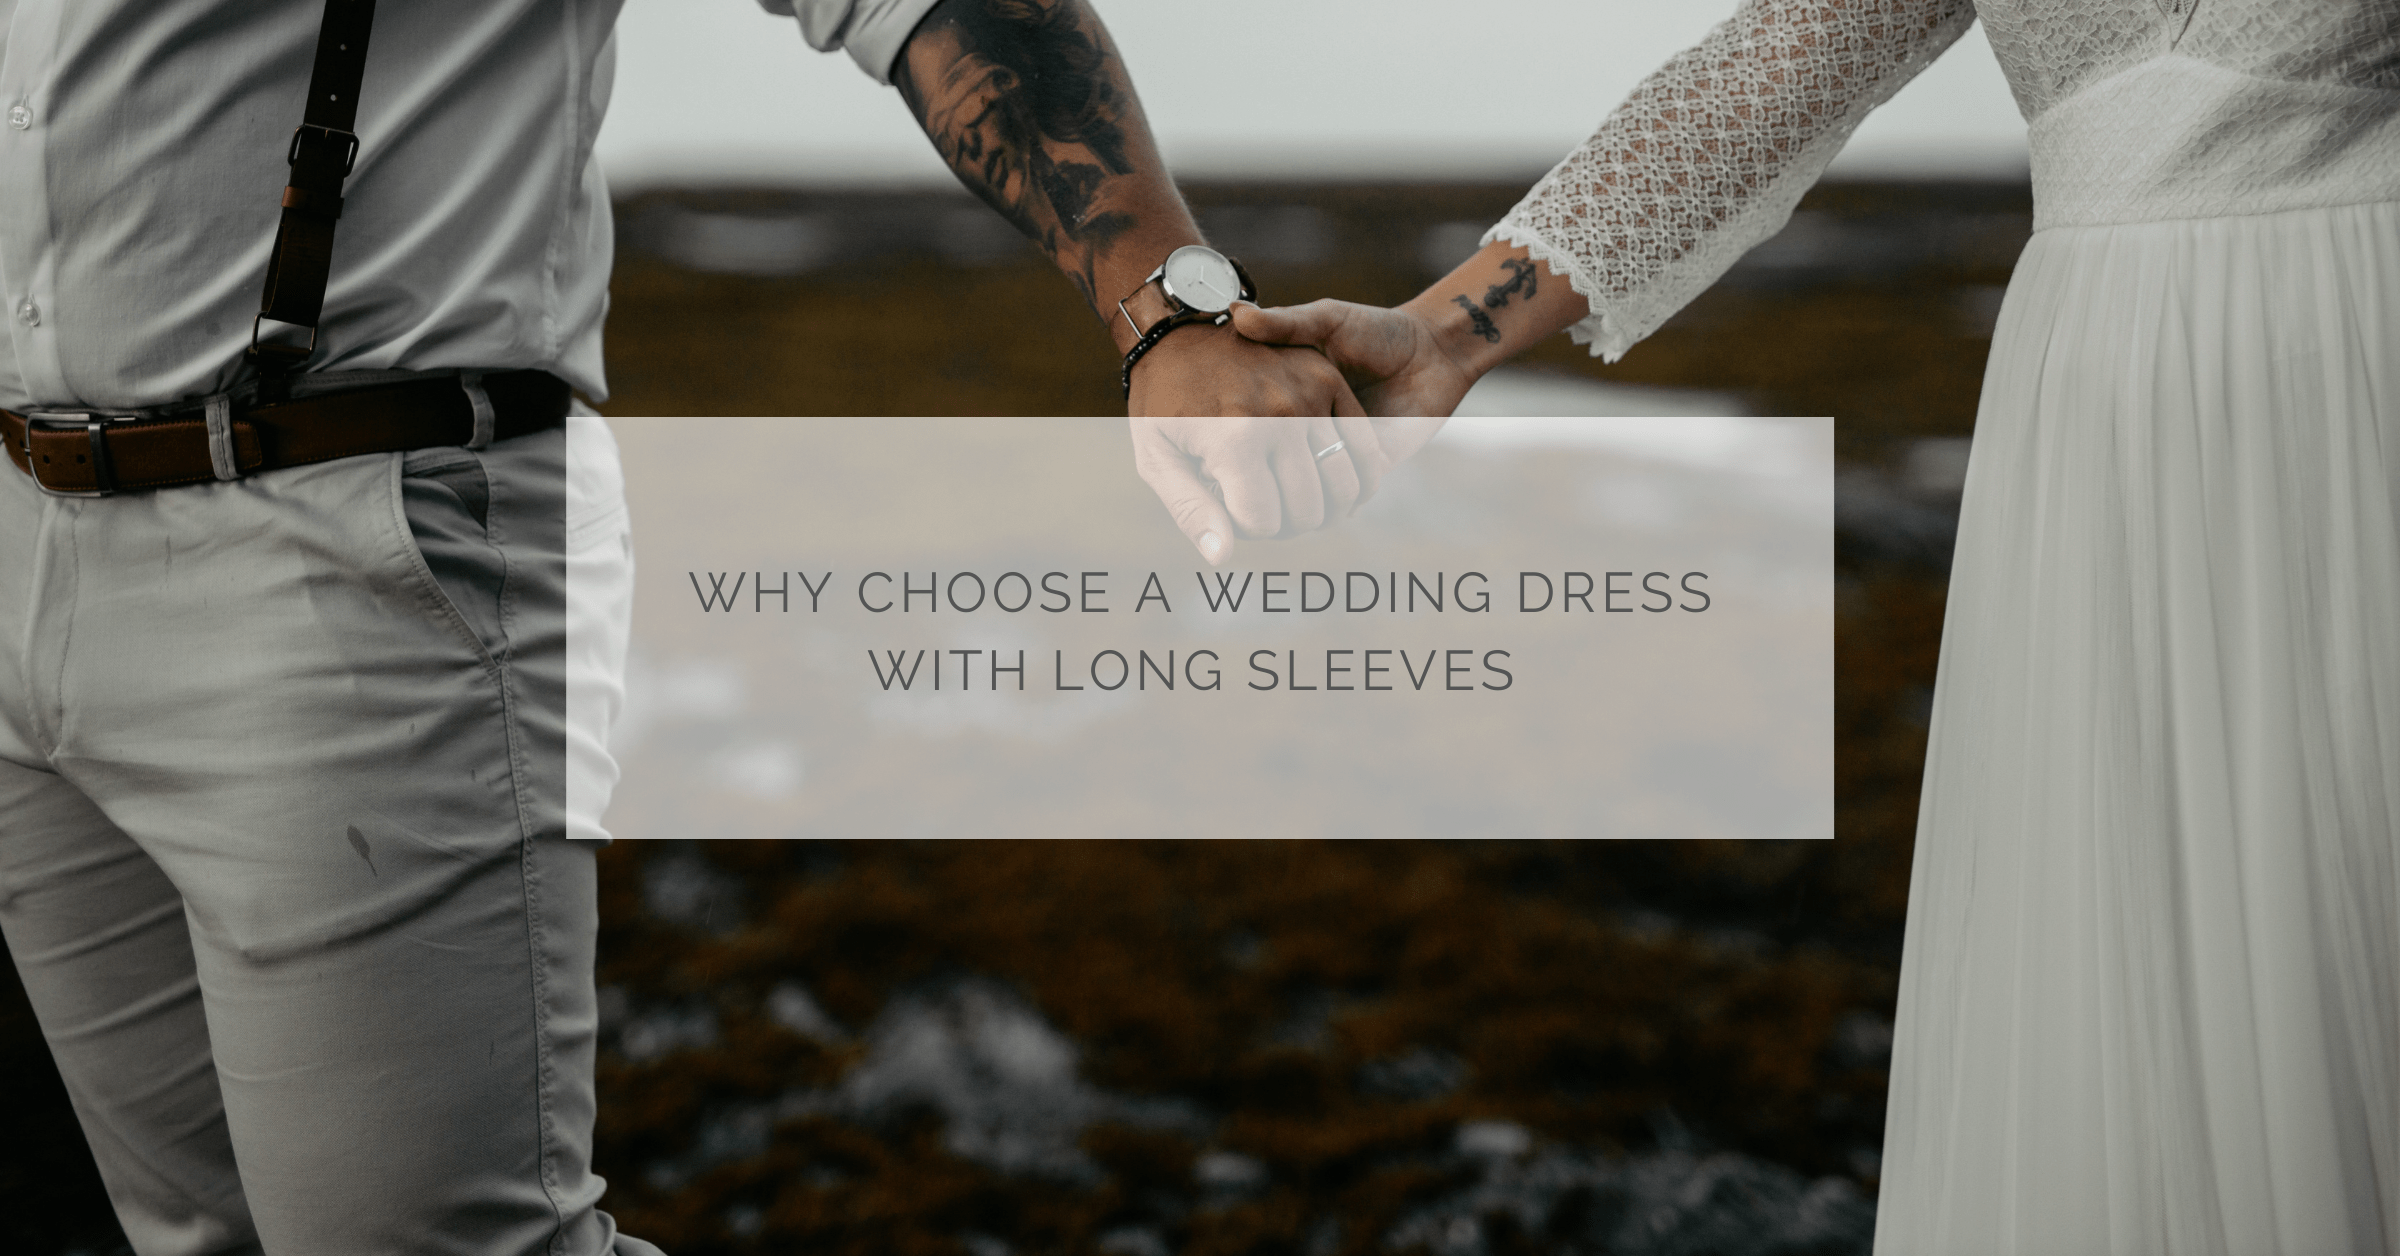 Why choose a wedding dress with long sleeves in Quebec?